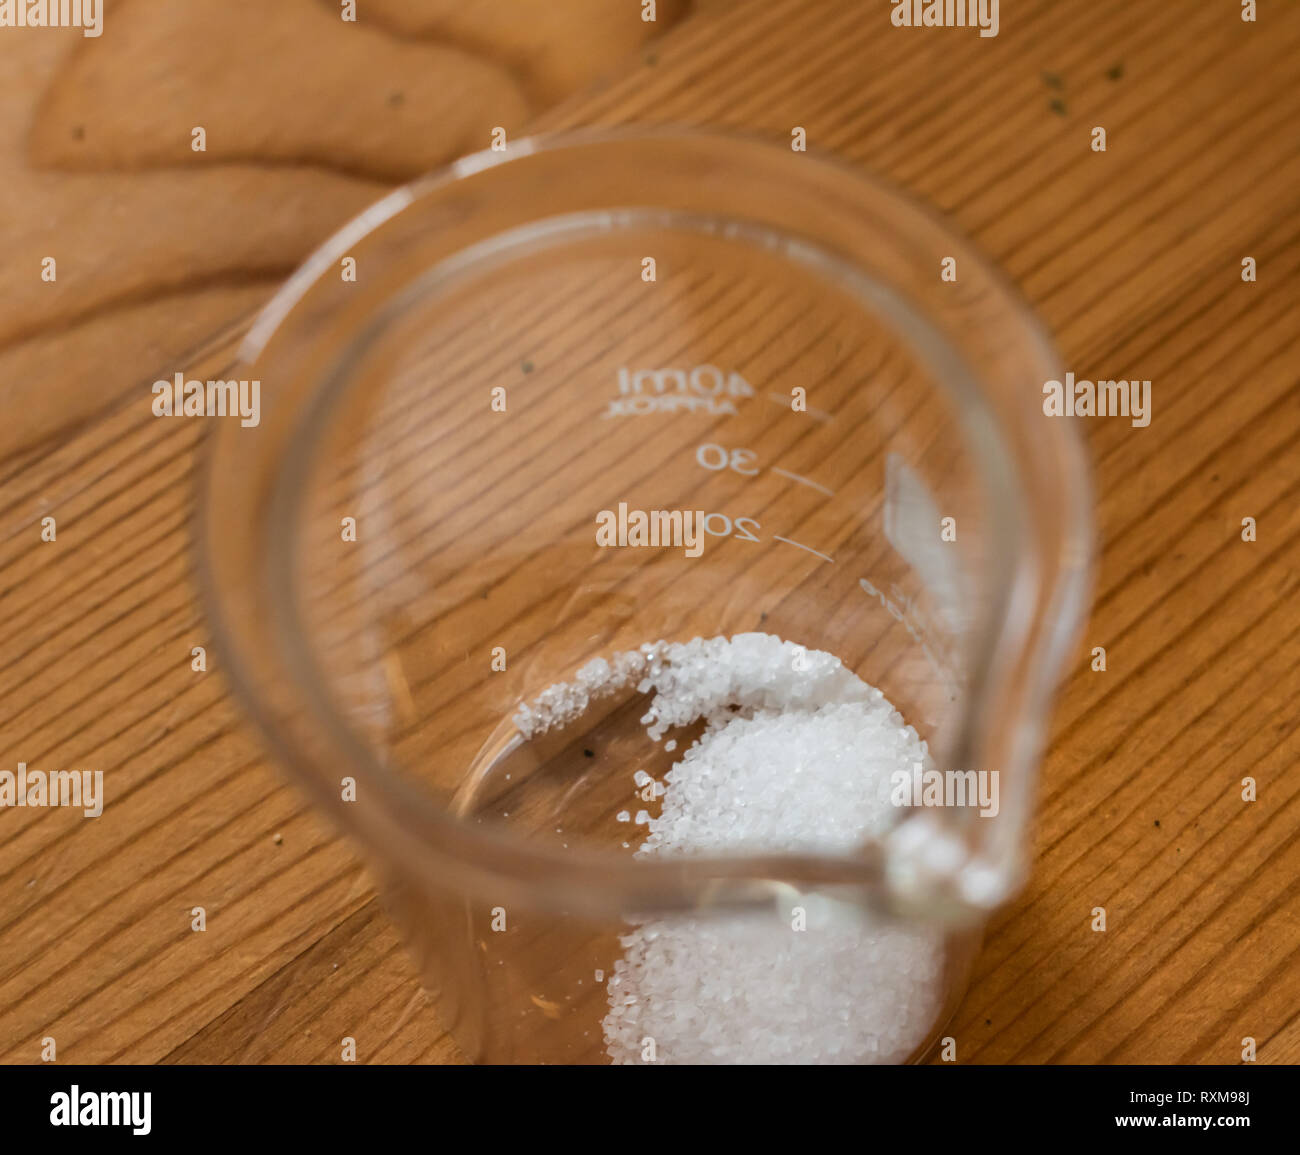 Small 40 mL glass chemistry beaker with small geometric sugar crystals laying in the bottom Stock Photo